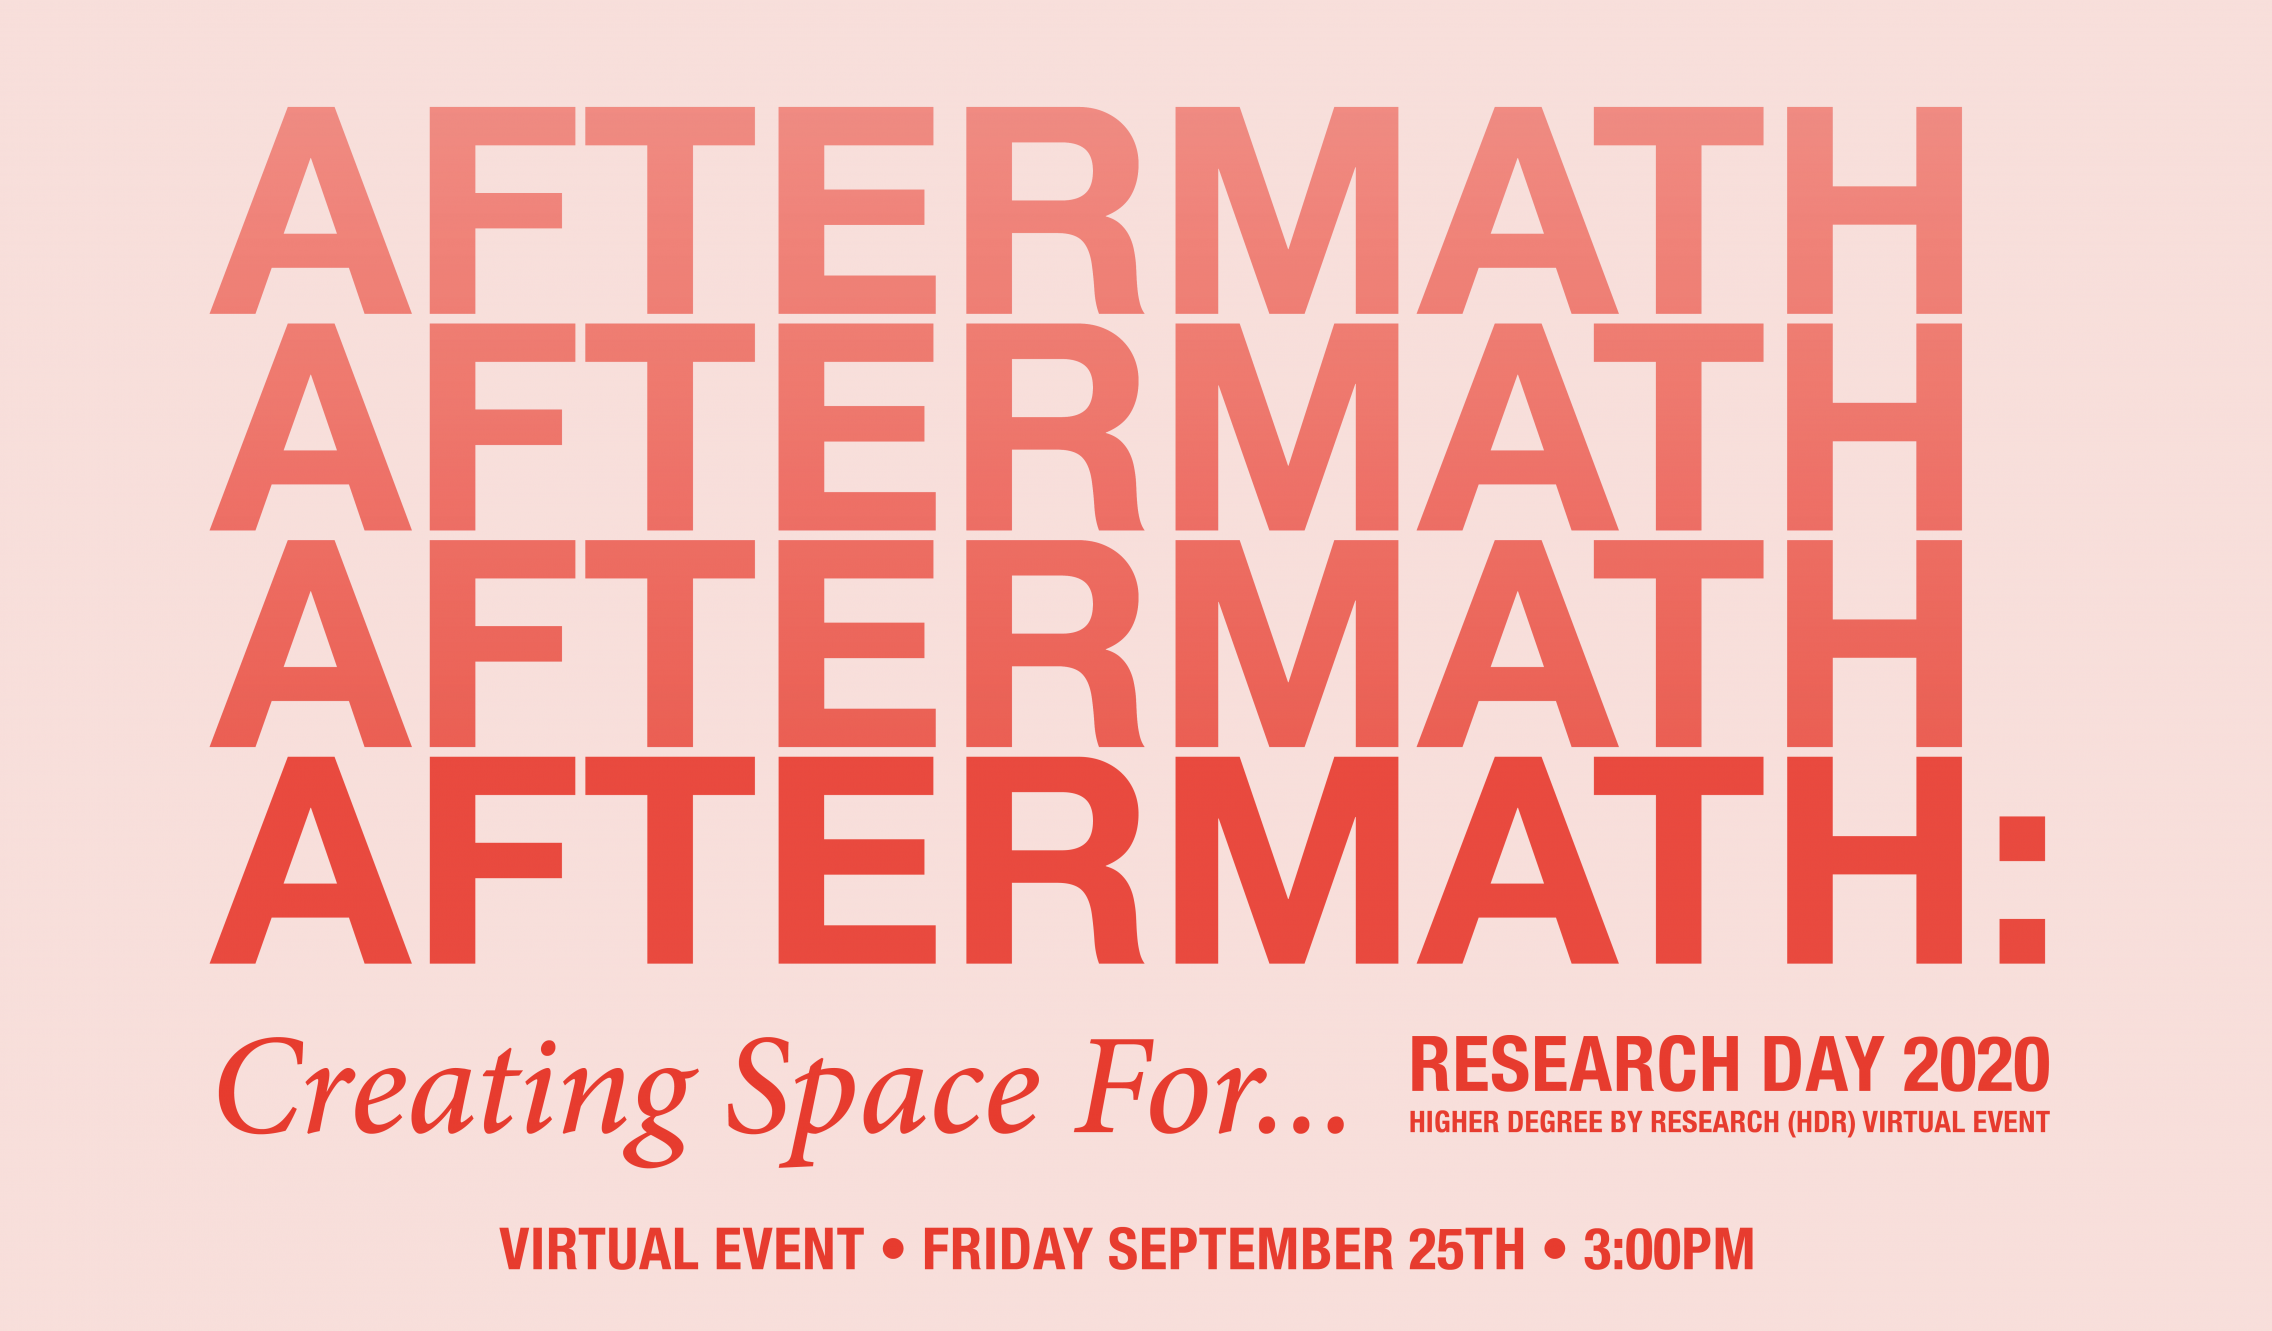 Research Day: Aftermath, creating space for....